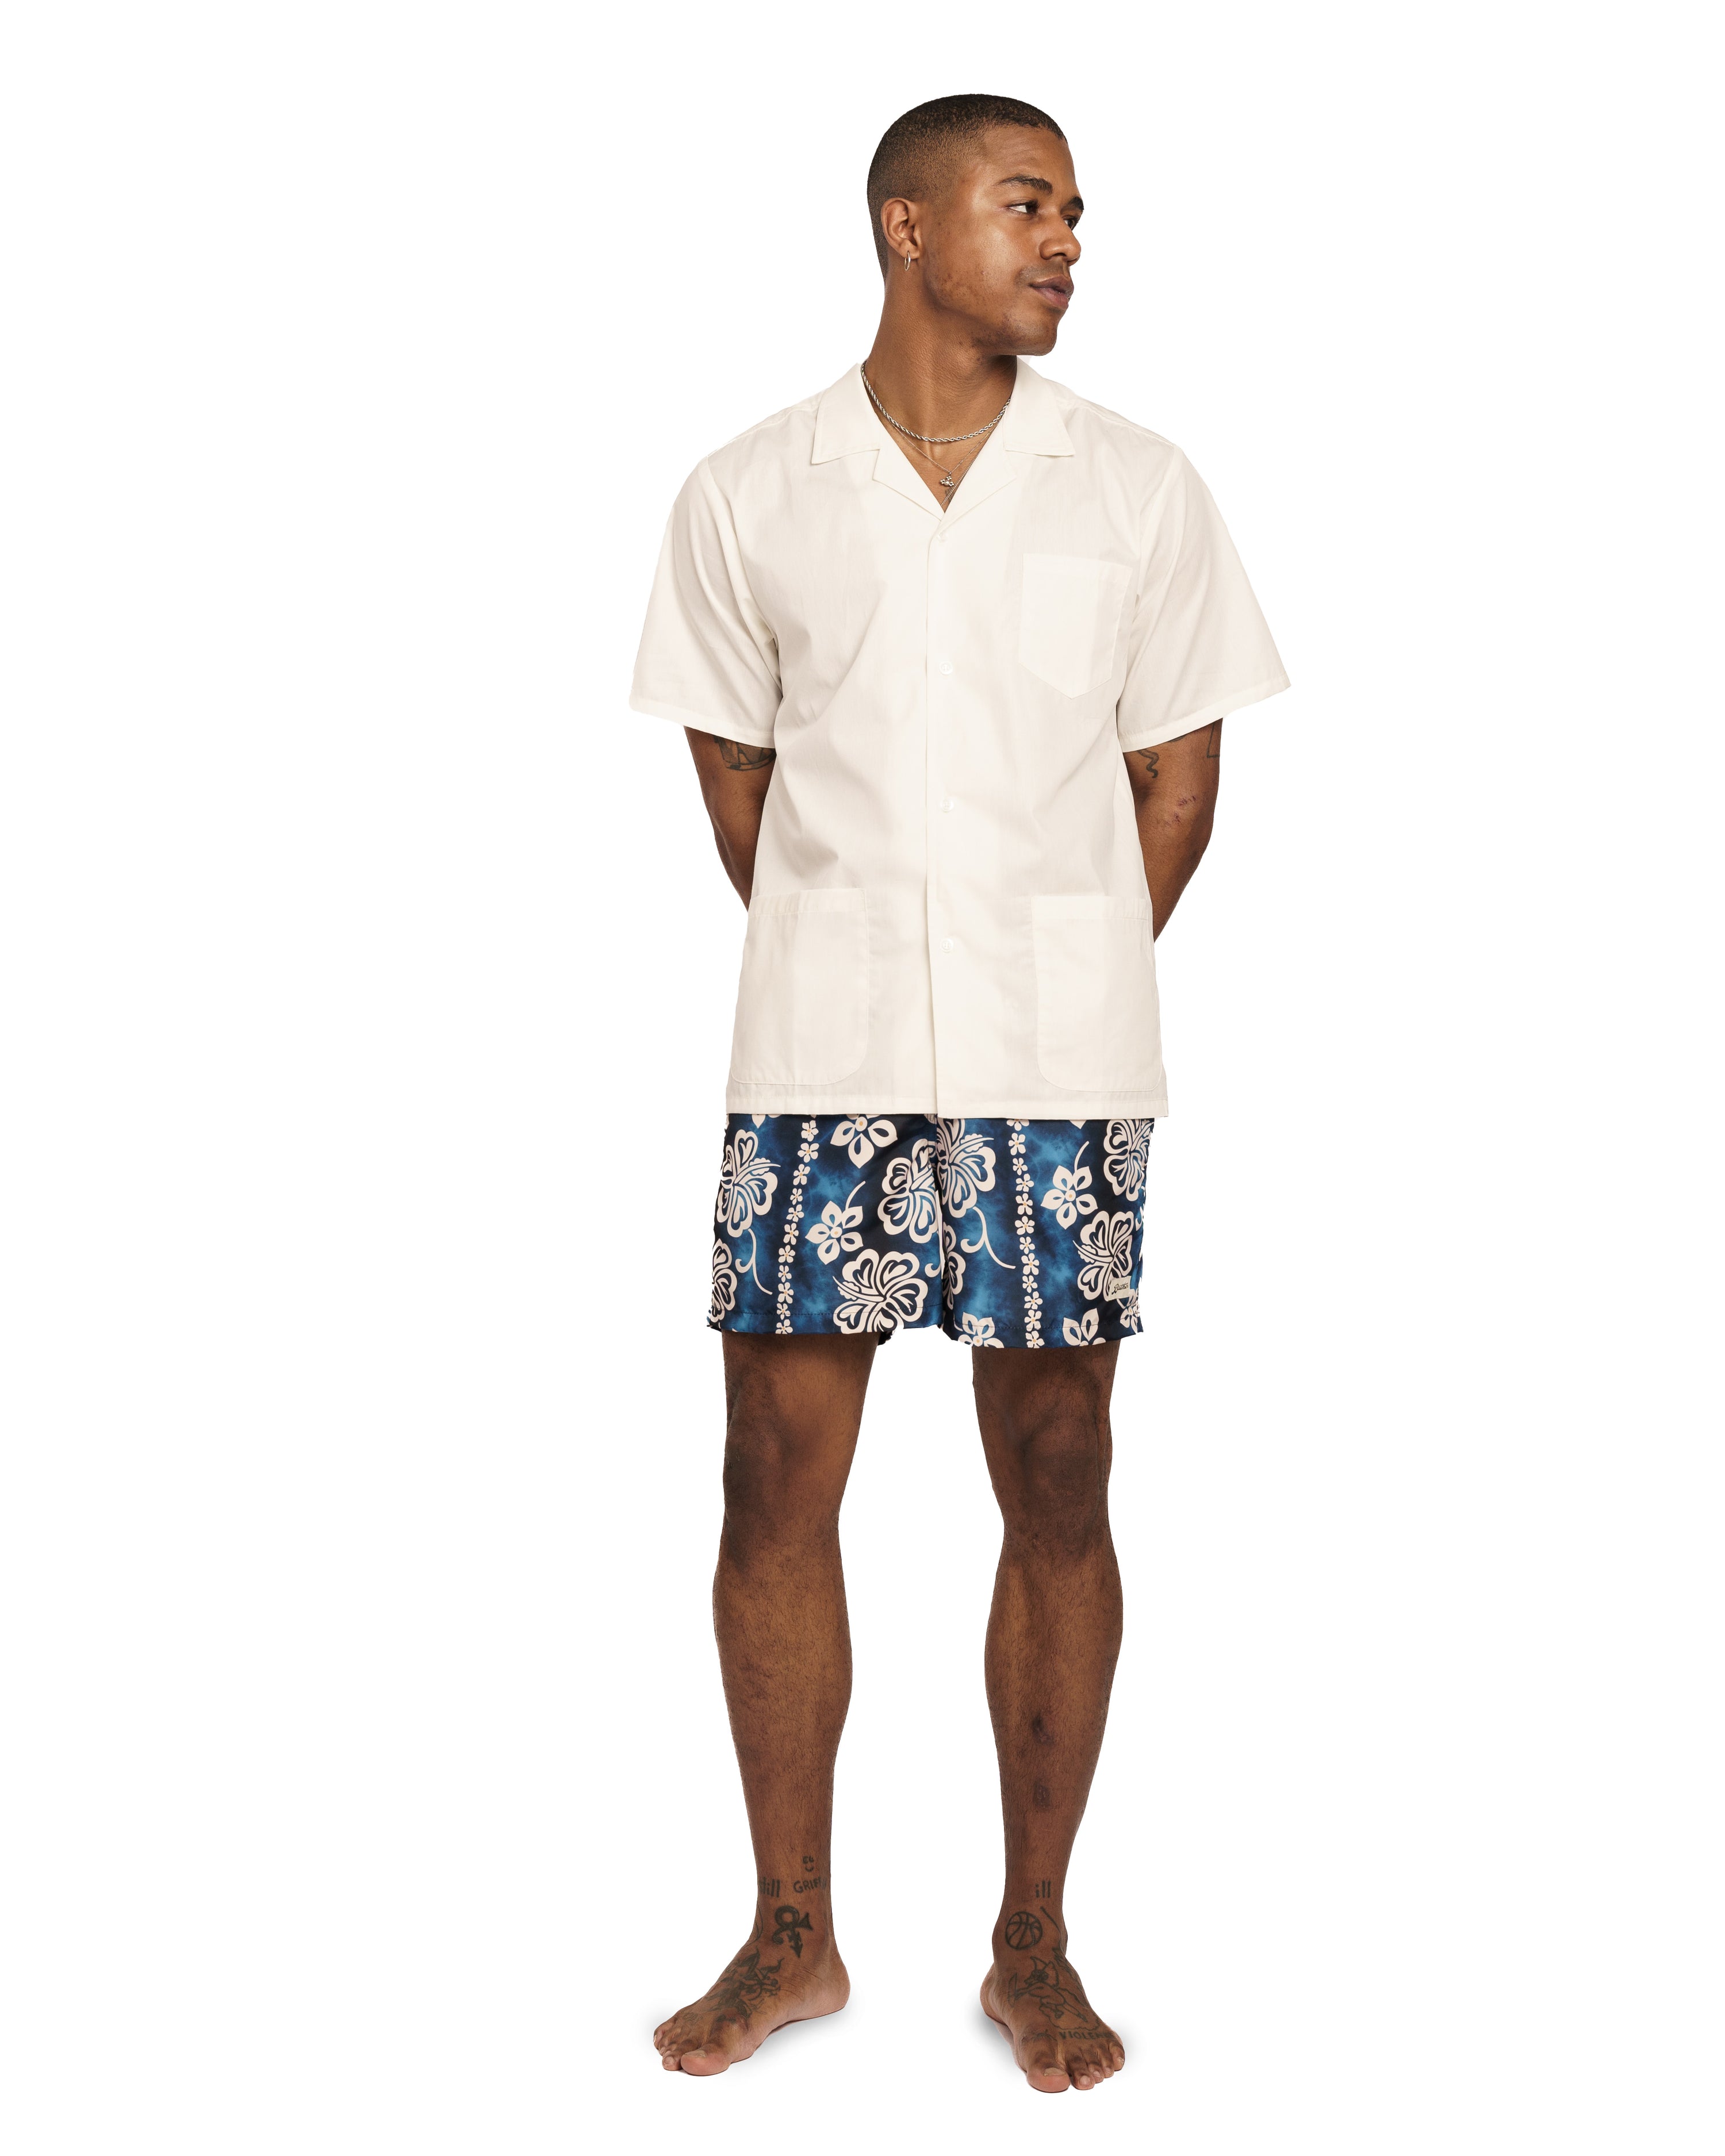 Model wearing Blue Bather swim trunk with a tropical pattern and beige floral motif